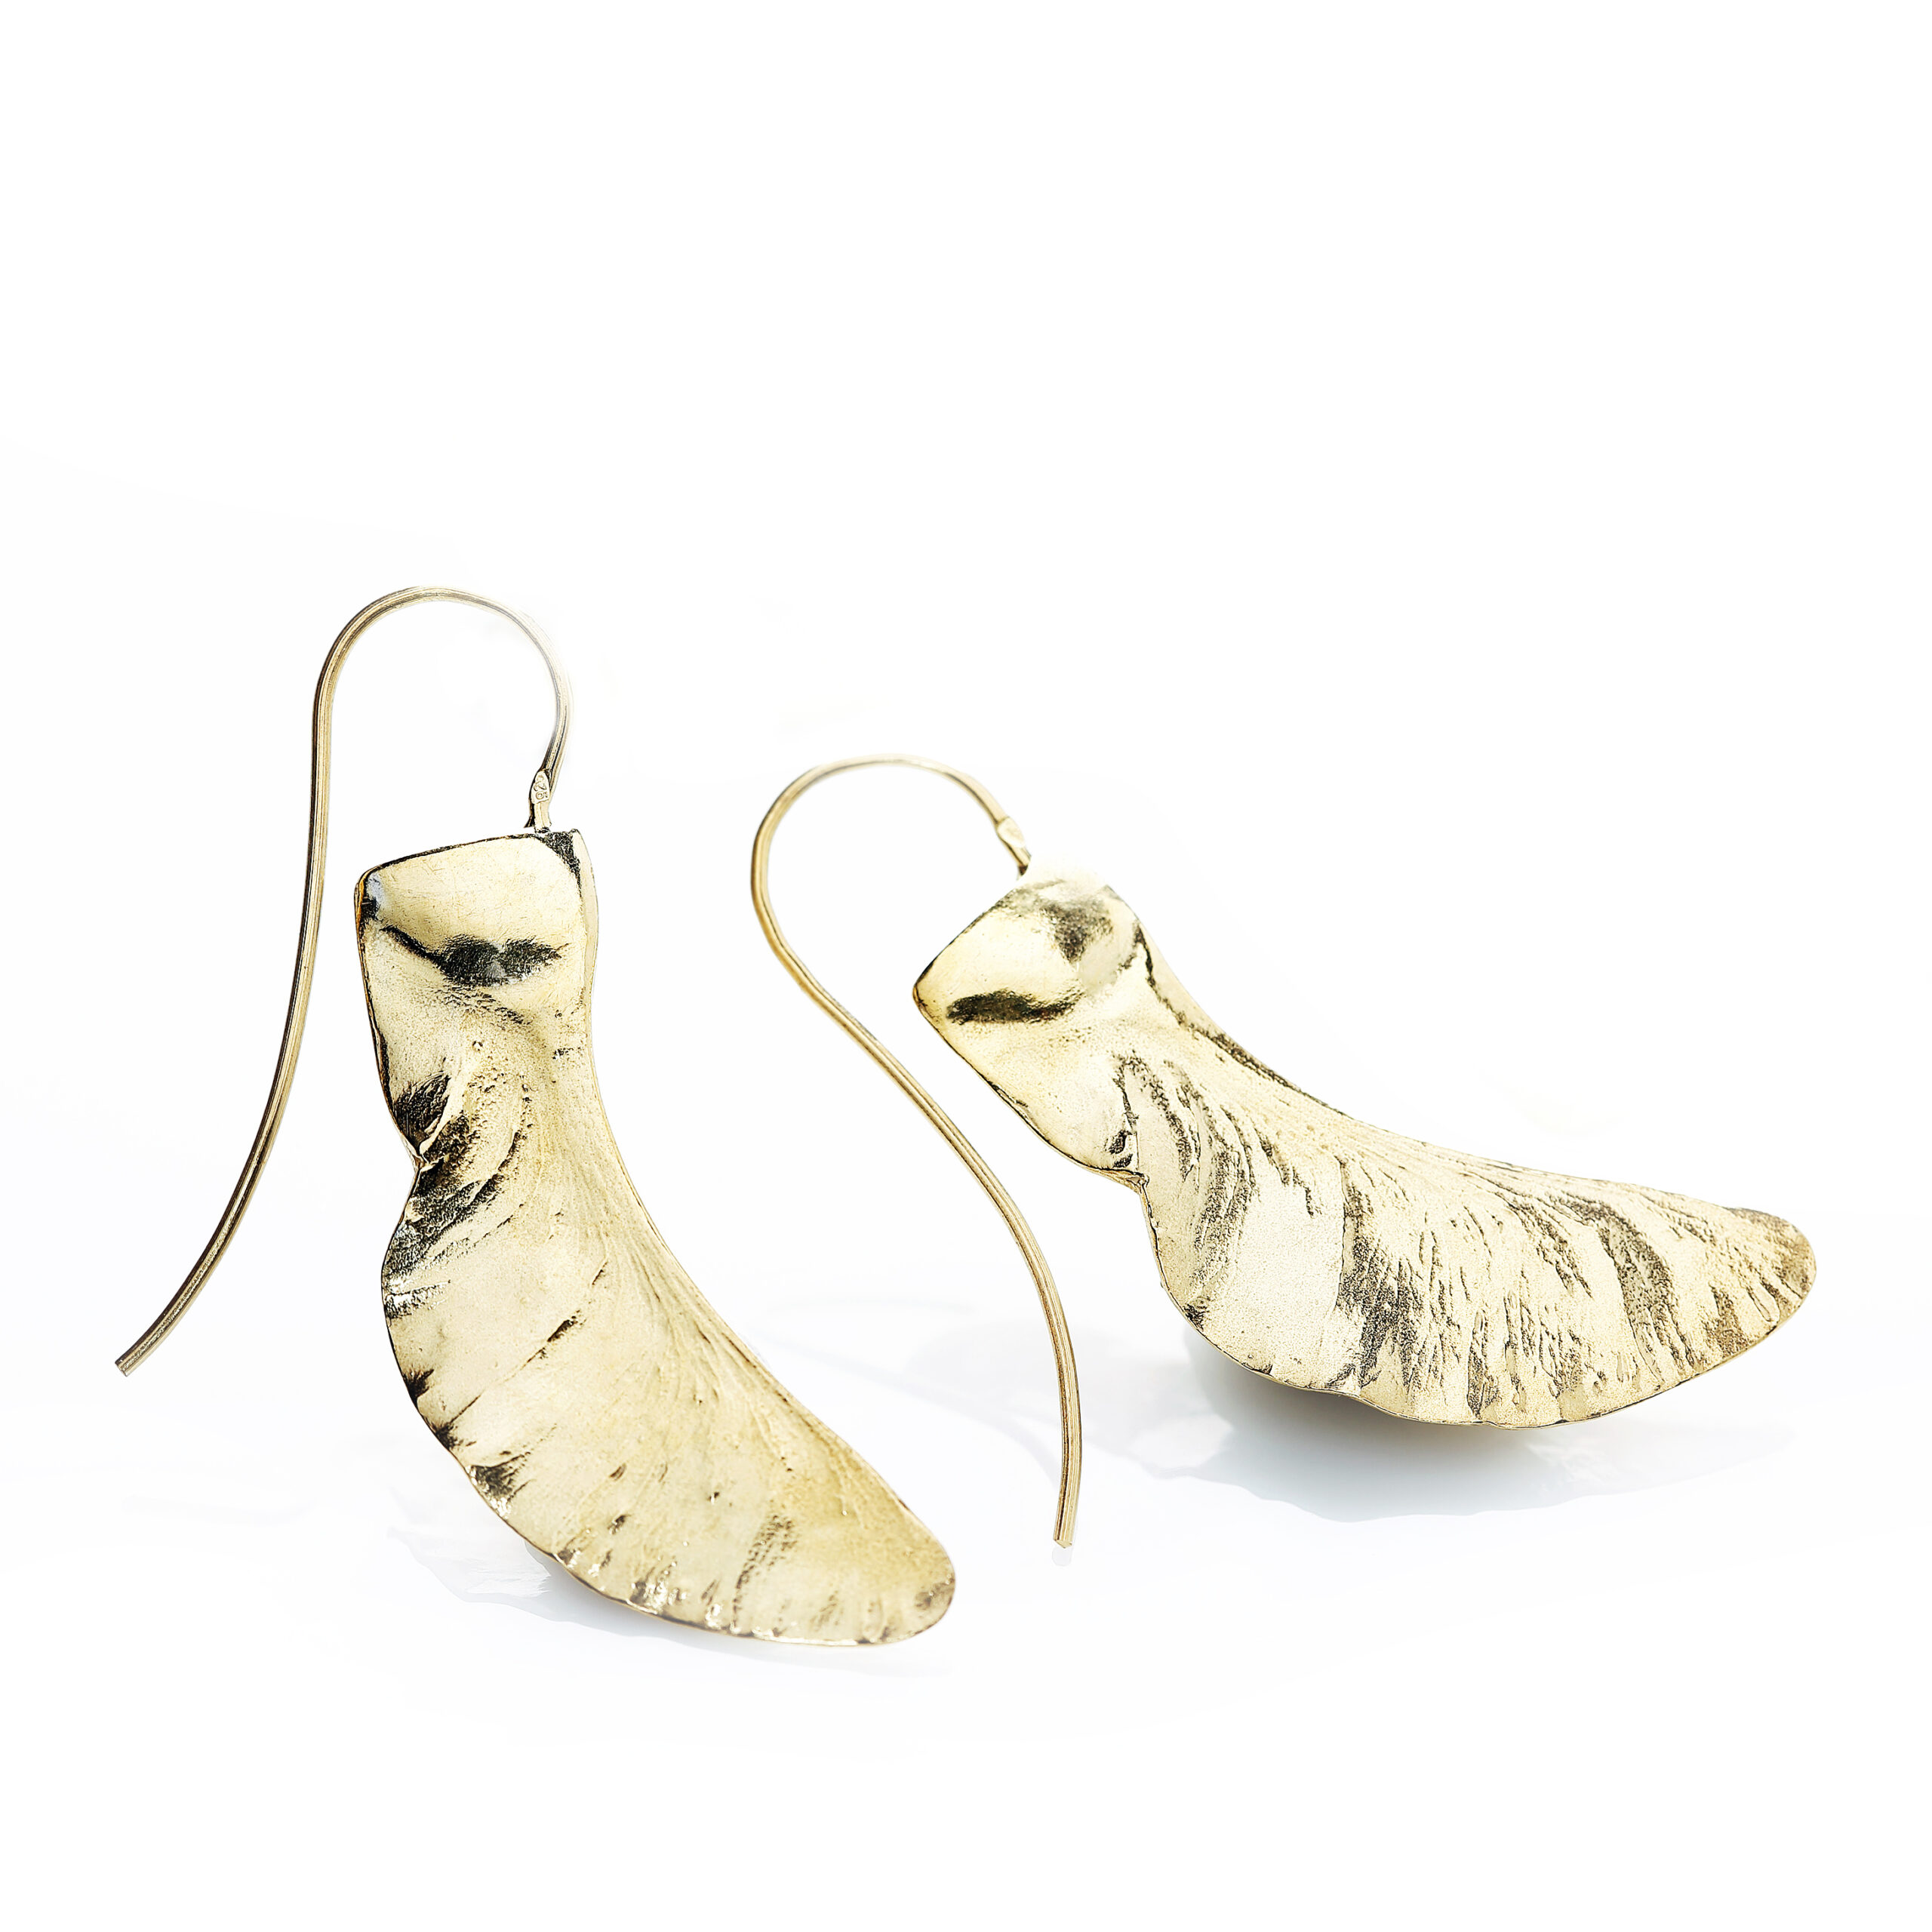 Golden maple seed earrings from collection "Autumn"